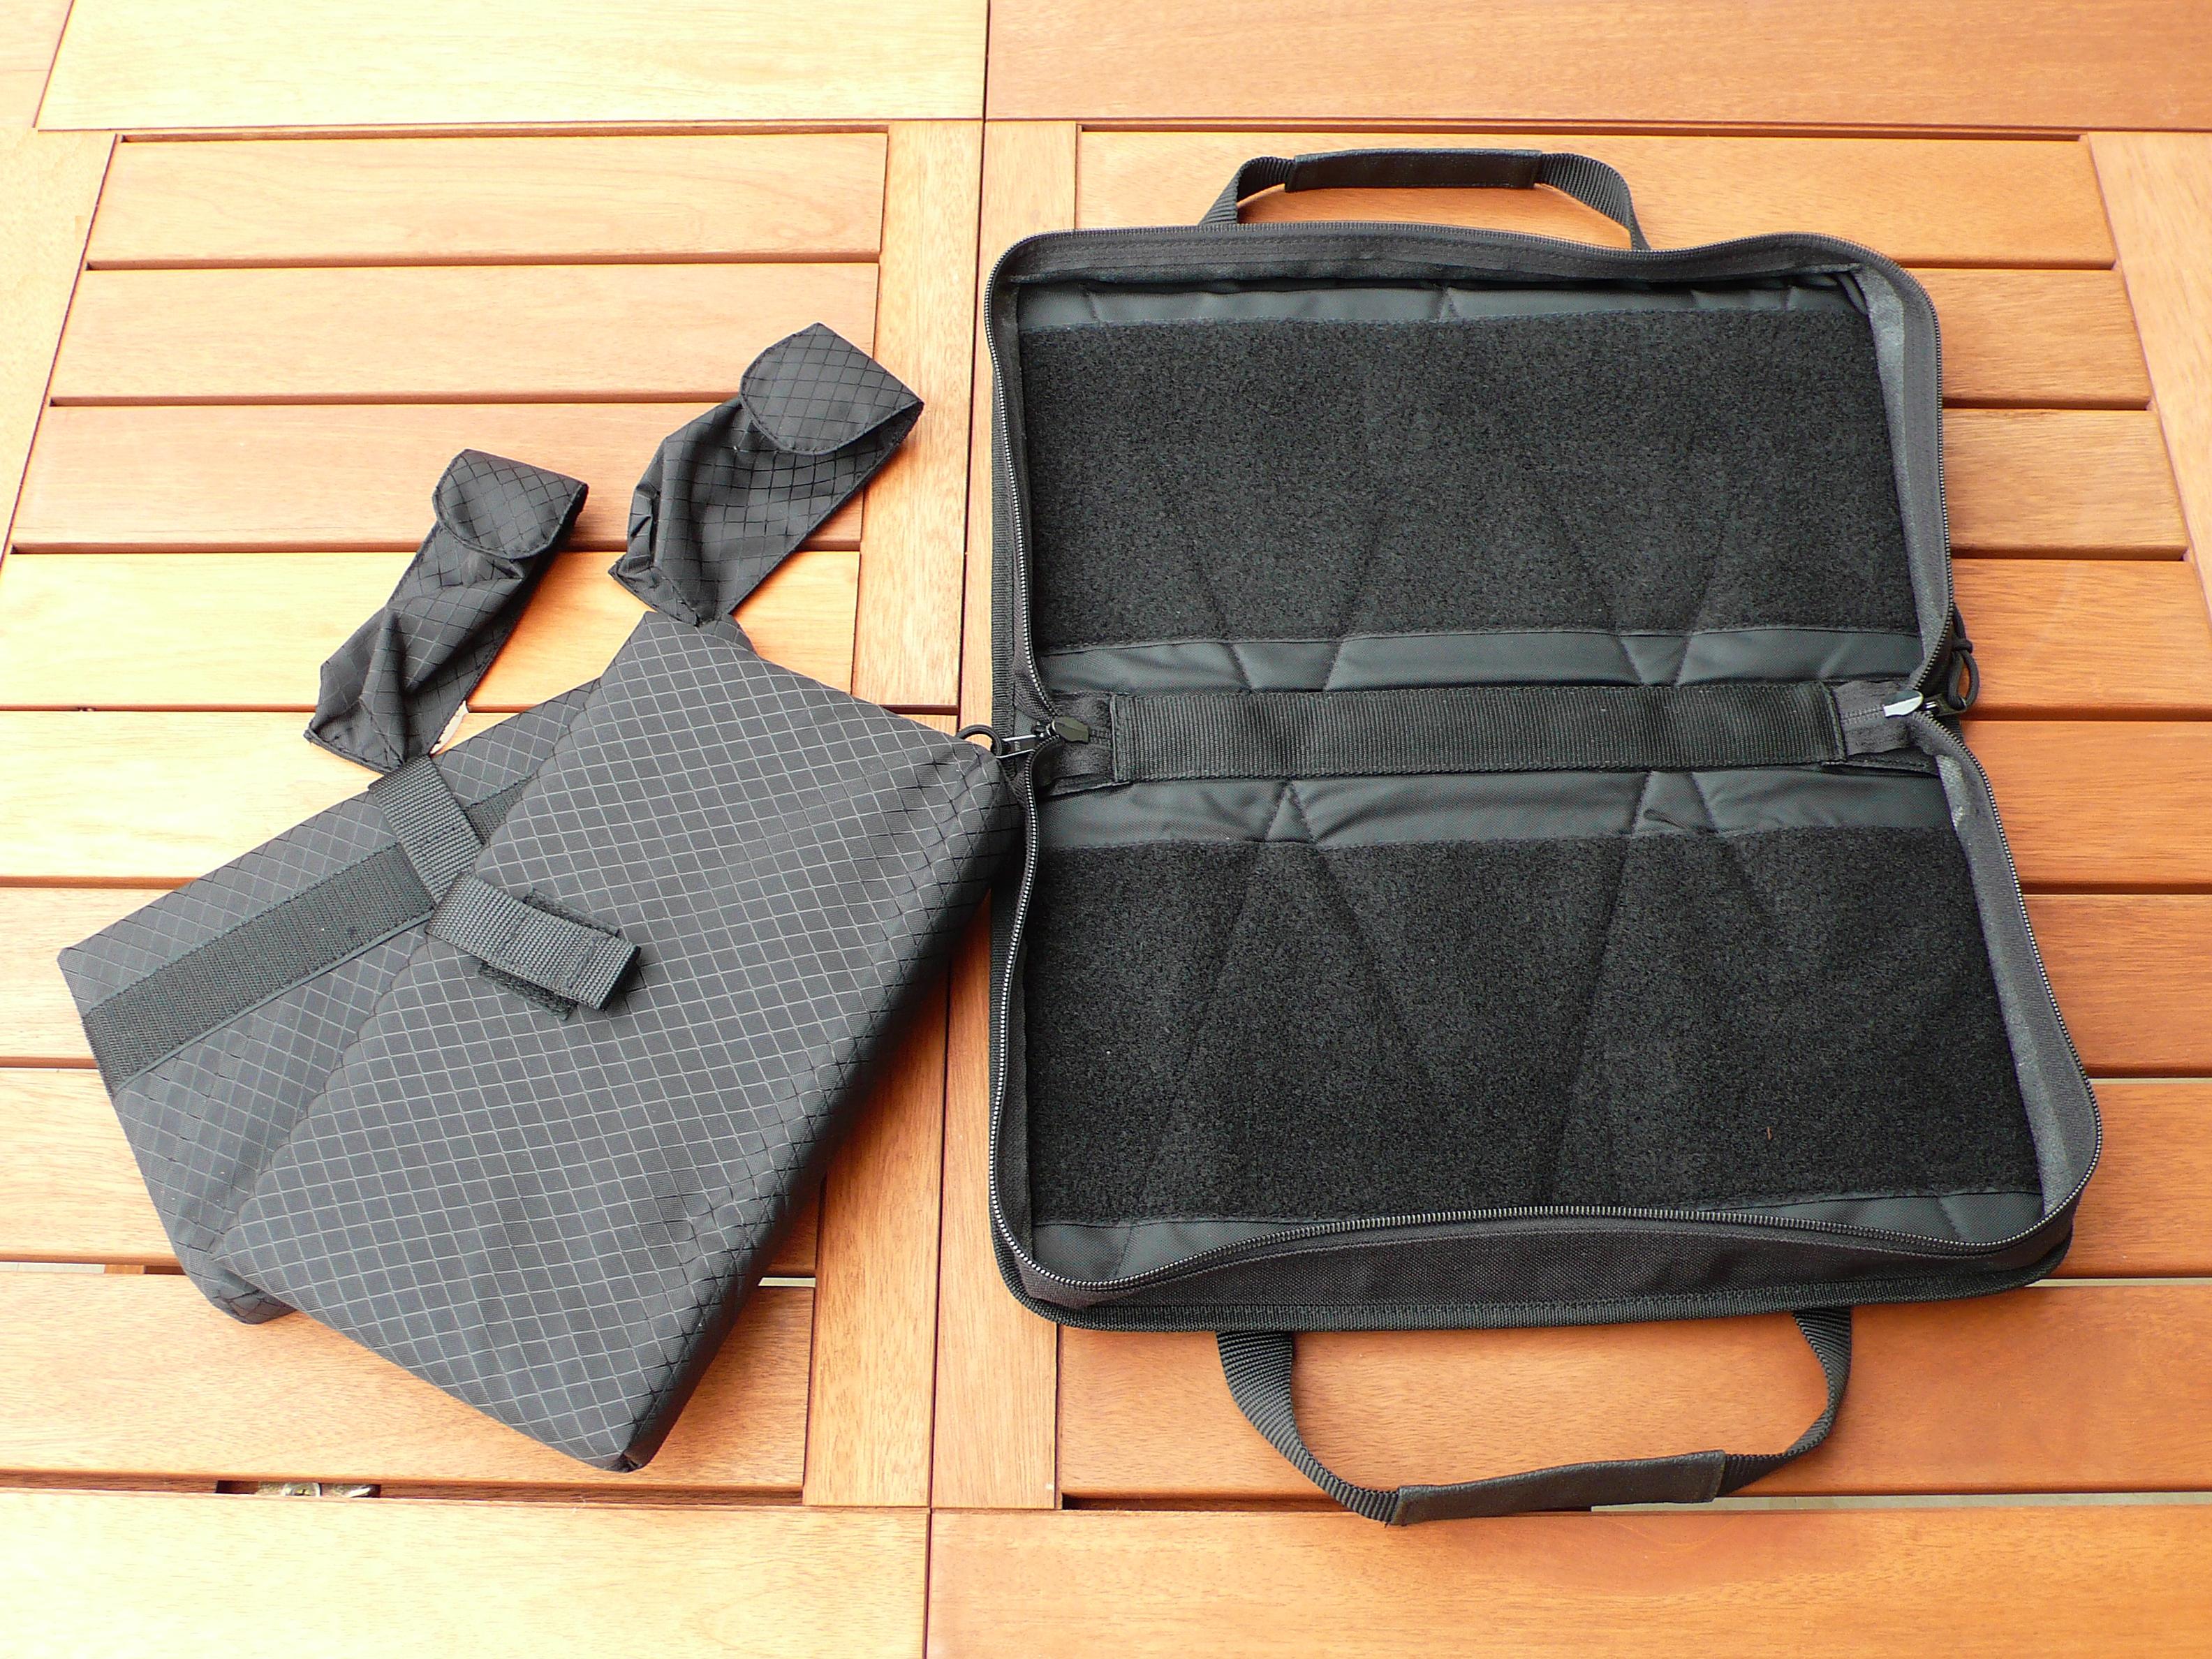 P2140-2 Double Pistol Storage and Travelling Pad